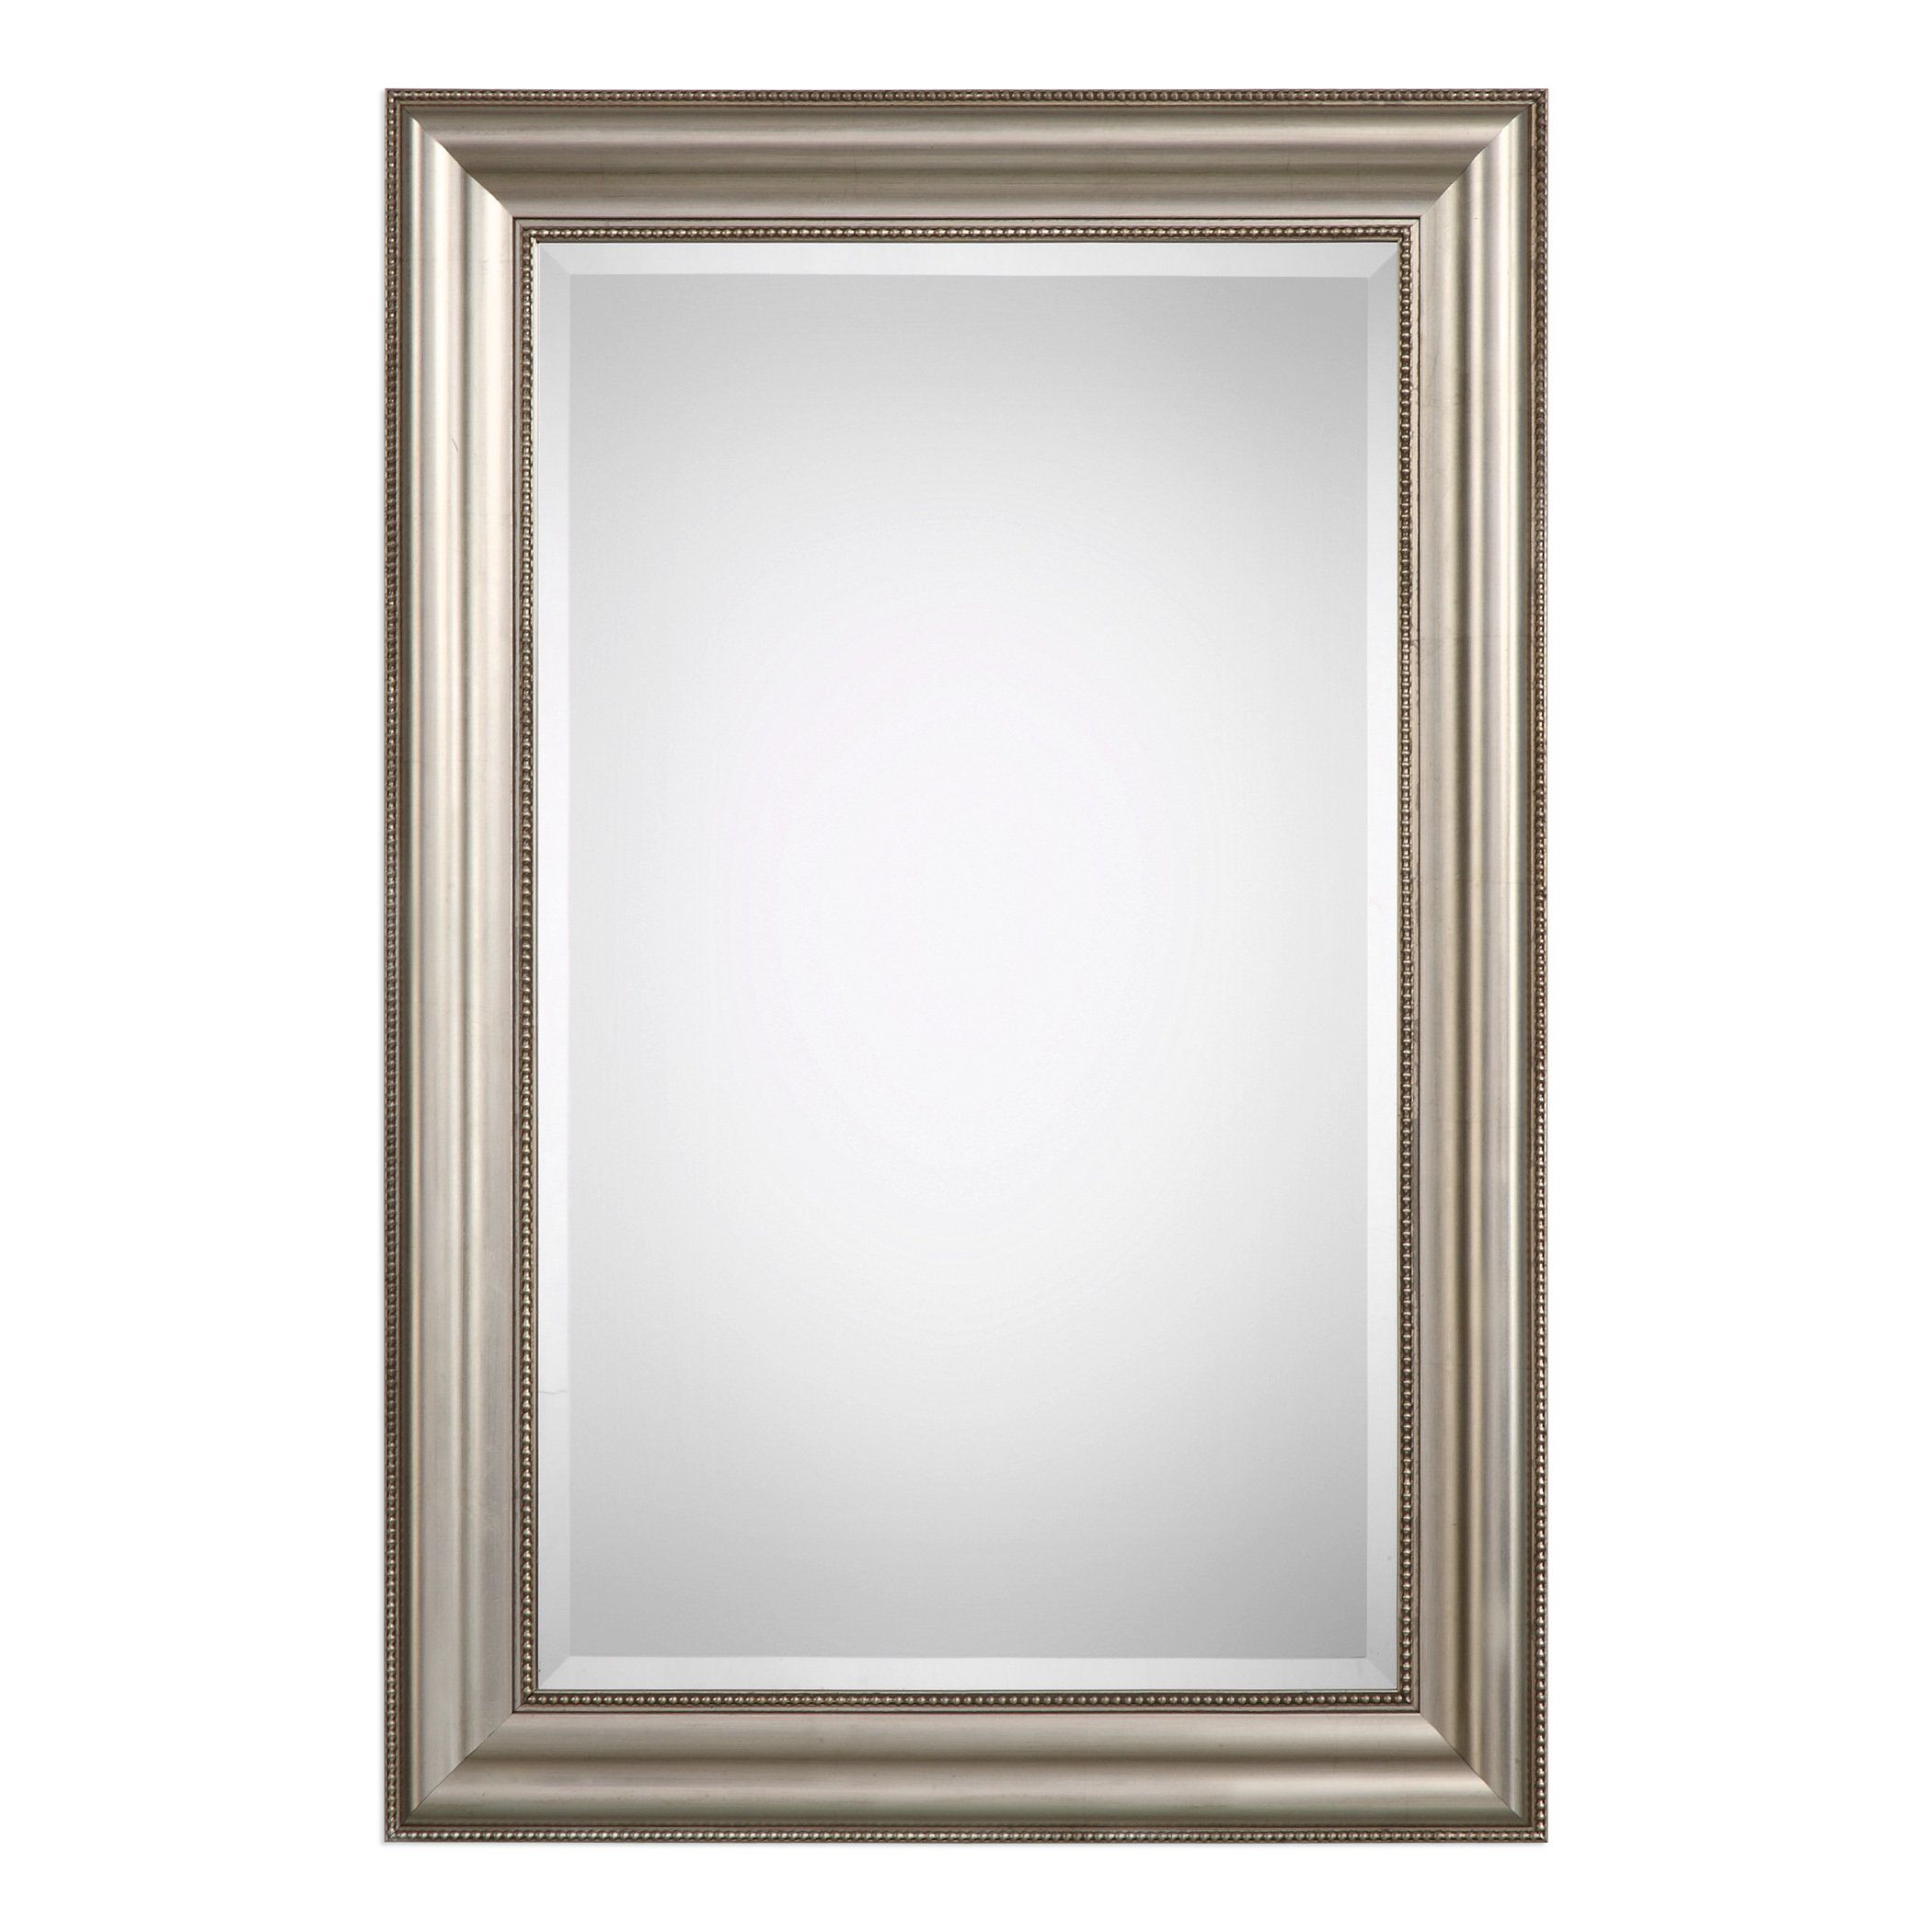 Farmhouse Mirrors | Birch Lane Throughout Industrial Full Length Mirrors (View 17 of 20)